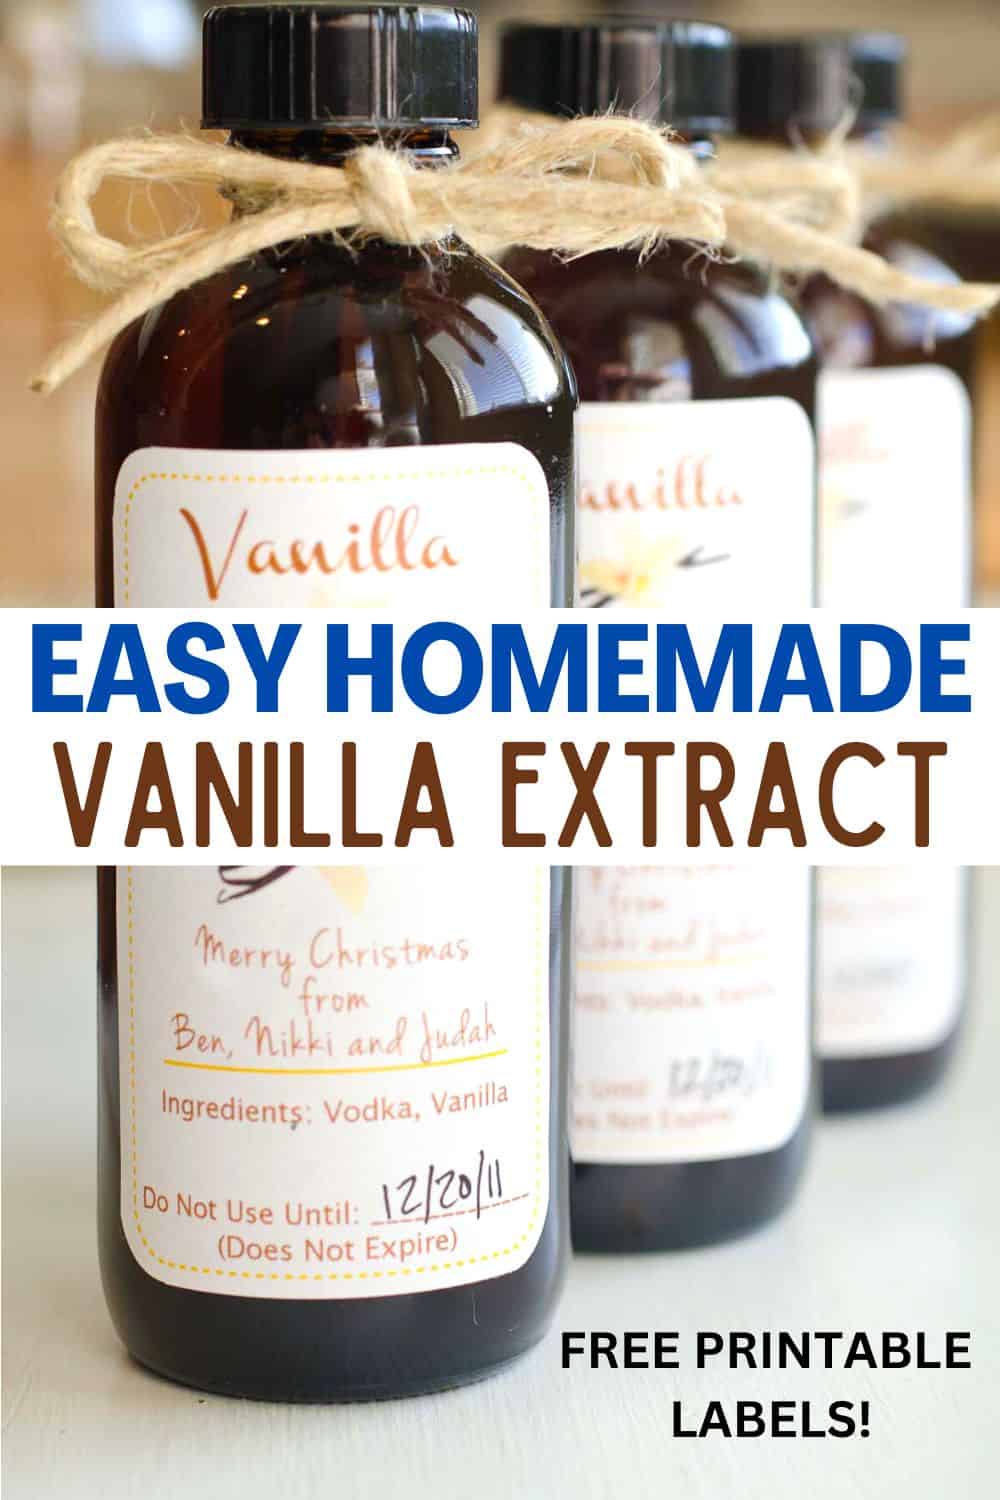 This recipe teaches you how to make homemade vanilla extract with only TWO ingredients! Pour into small jars and gift to teachers, neighbors, friends and family!